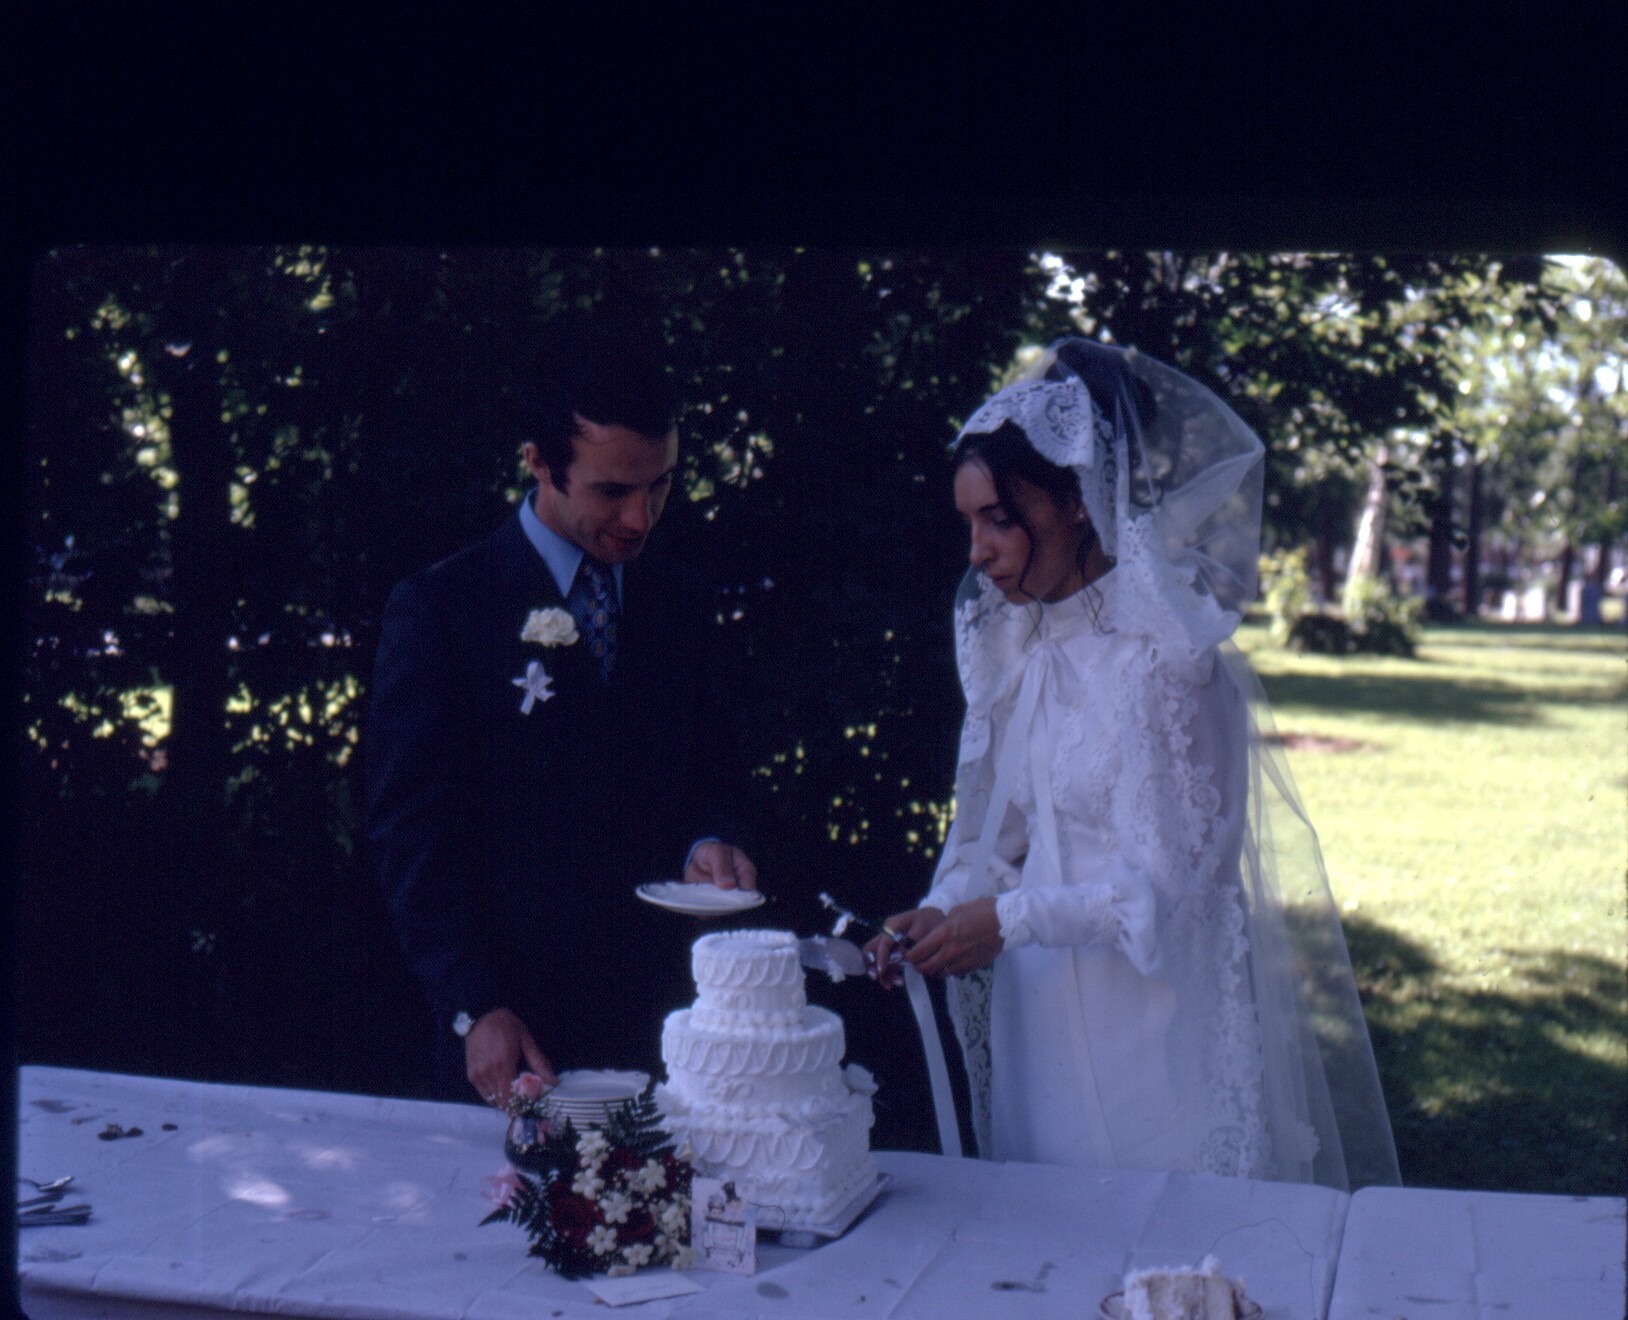 Coloured picture of a man and a woman cutting a wedding cake at their wedding